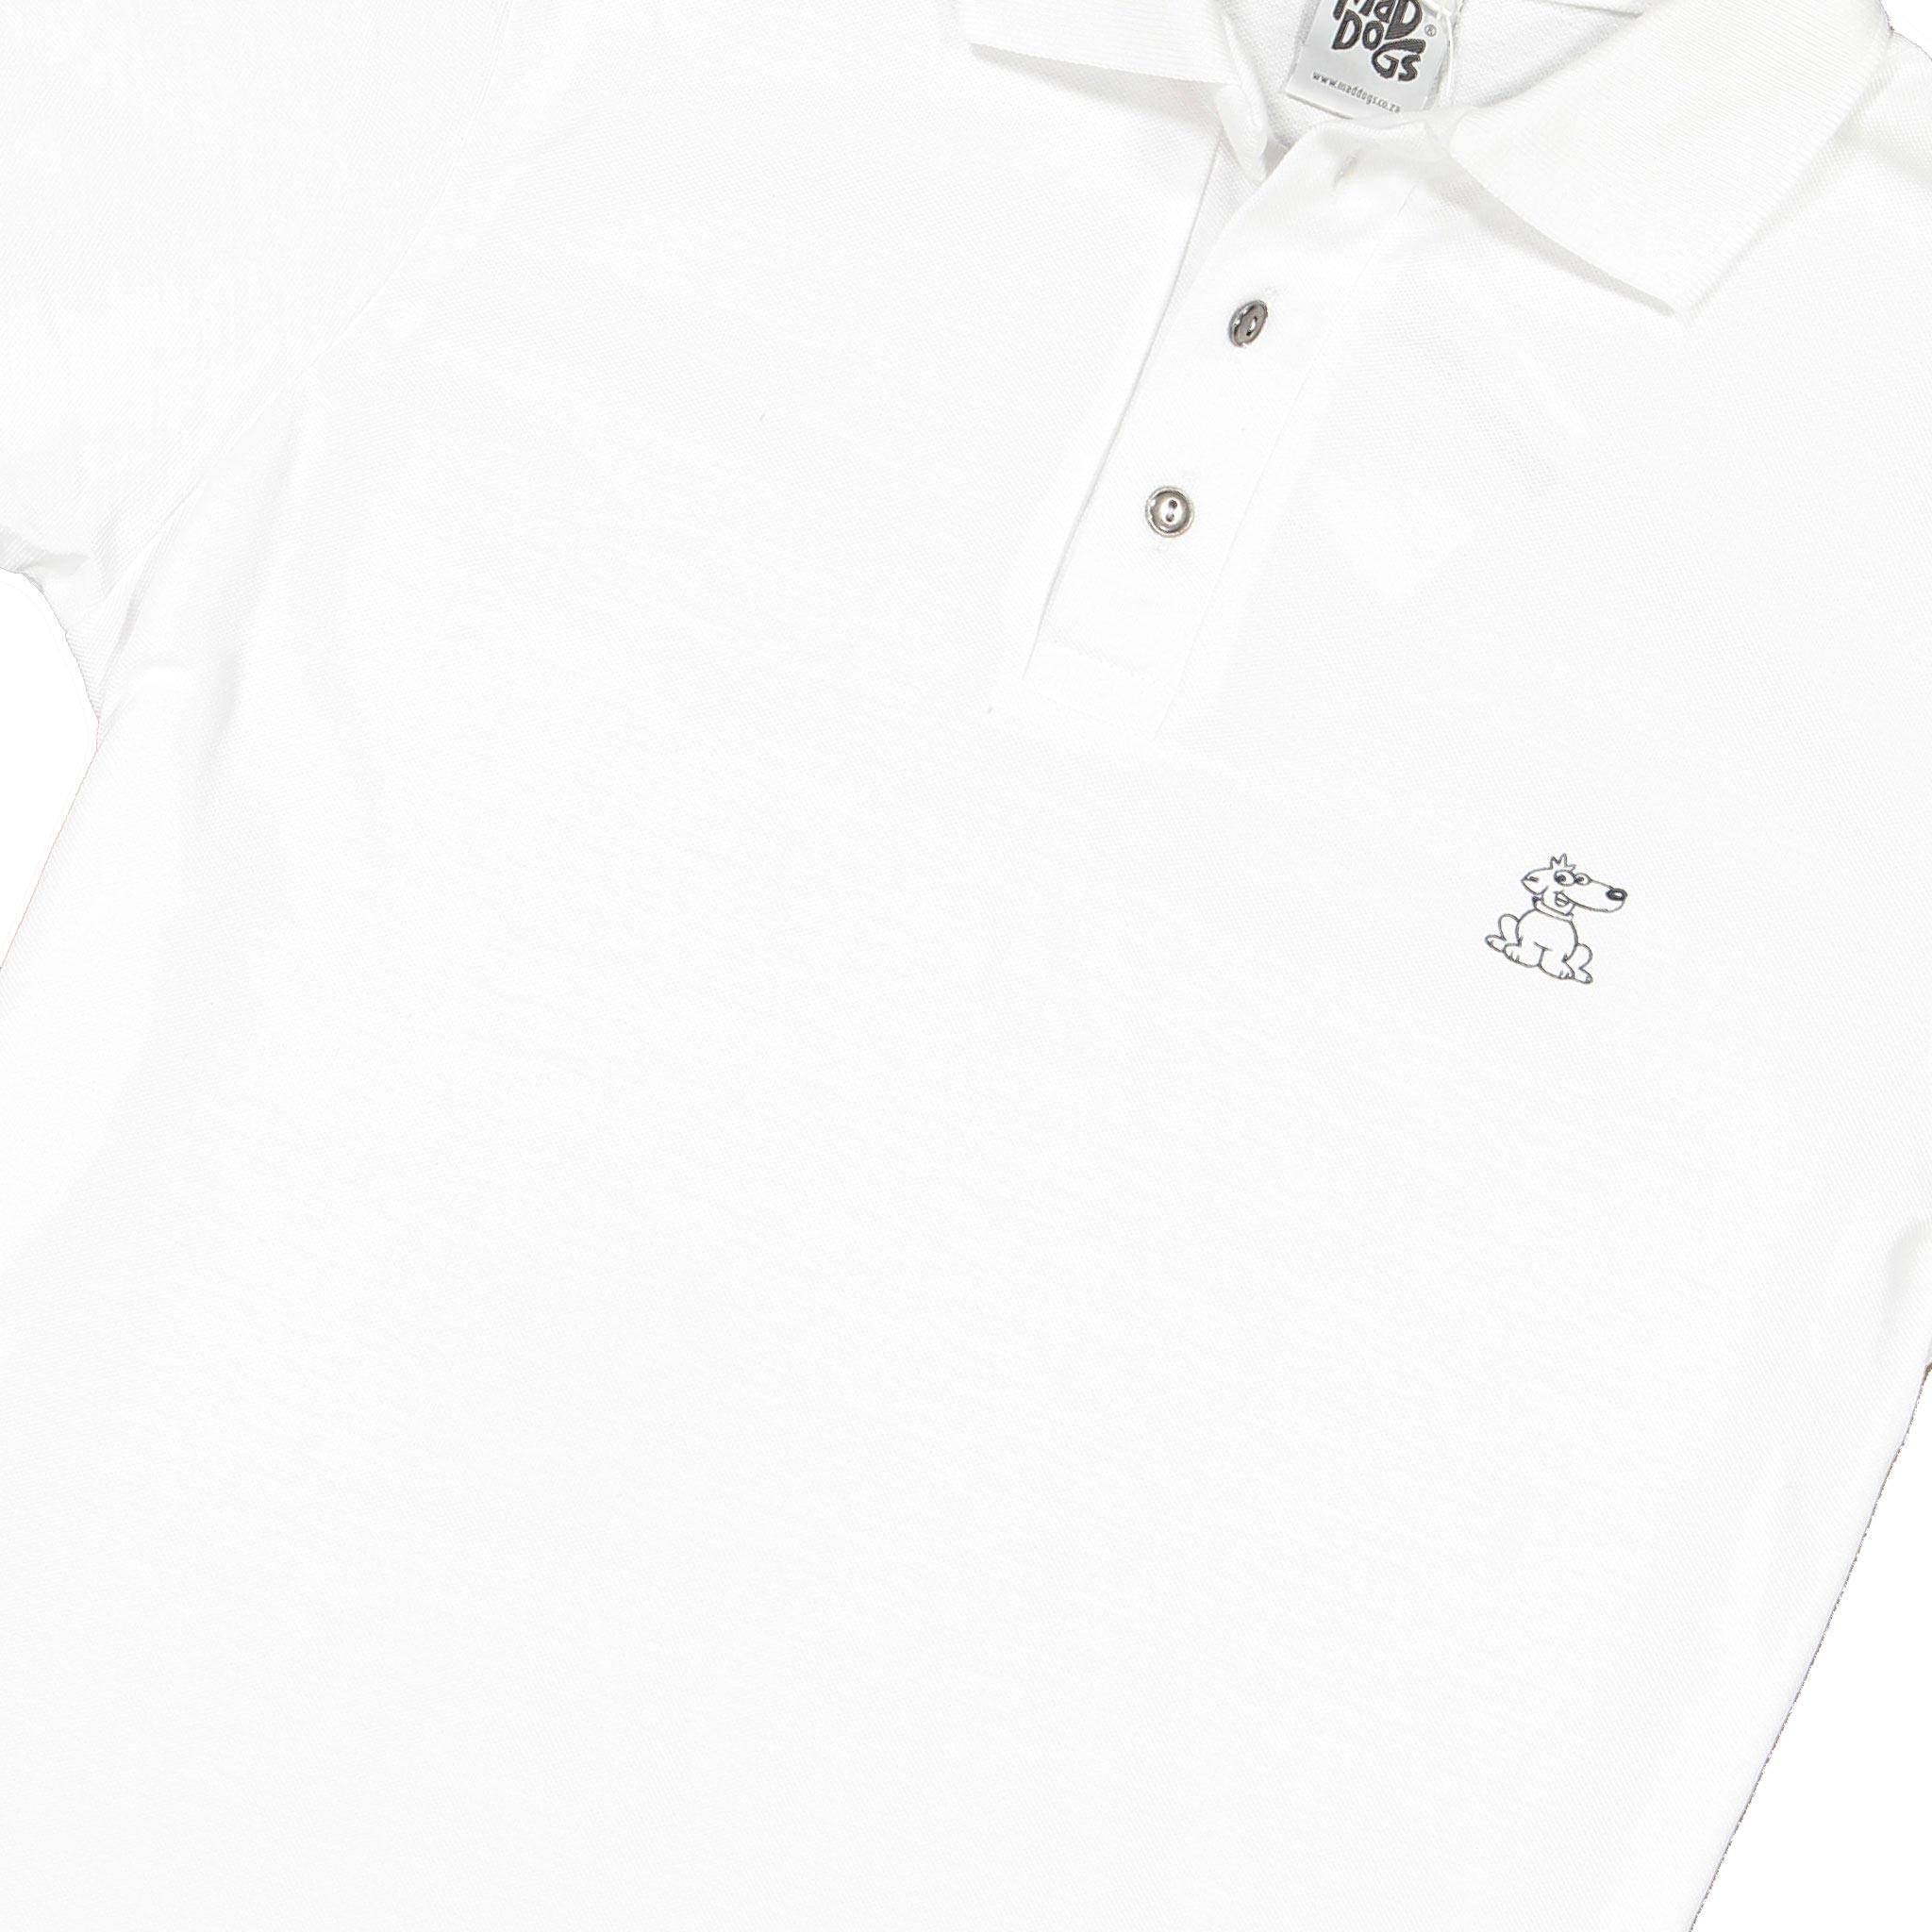 Mad Dogs Glacier White Mens Golf Shirt clothing & accessories Mad Dogs